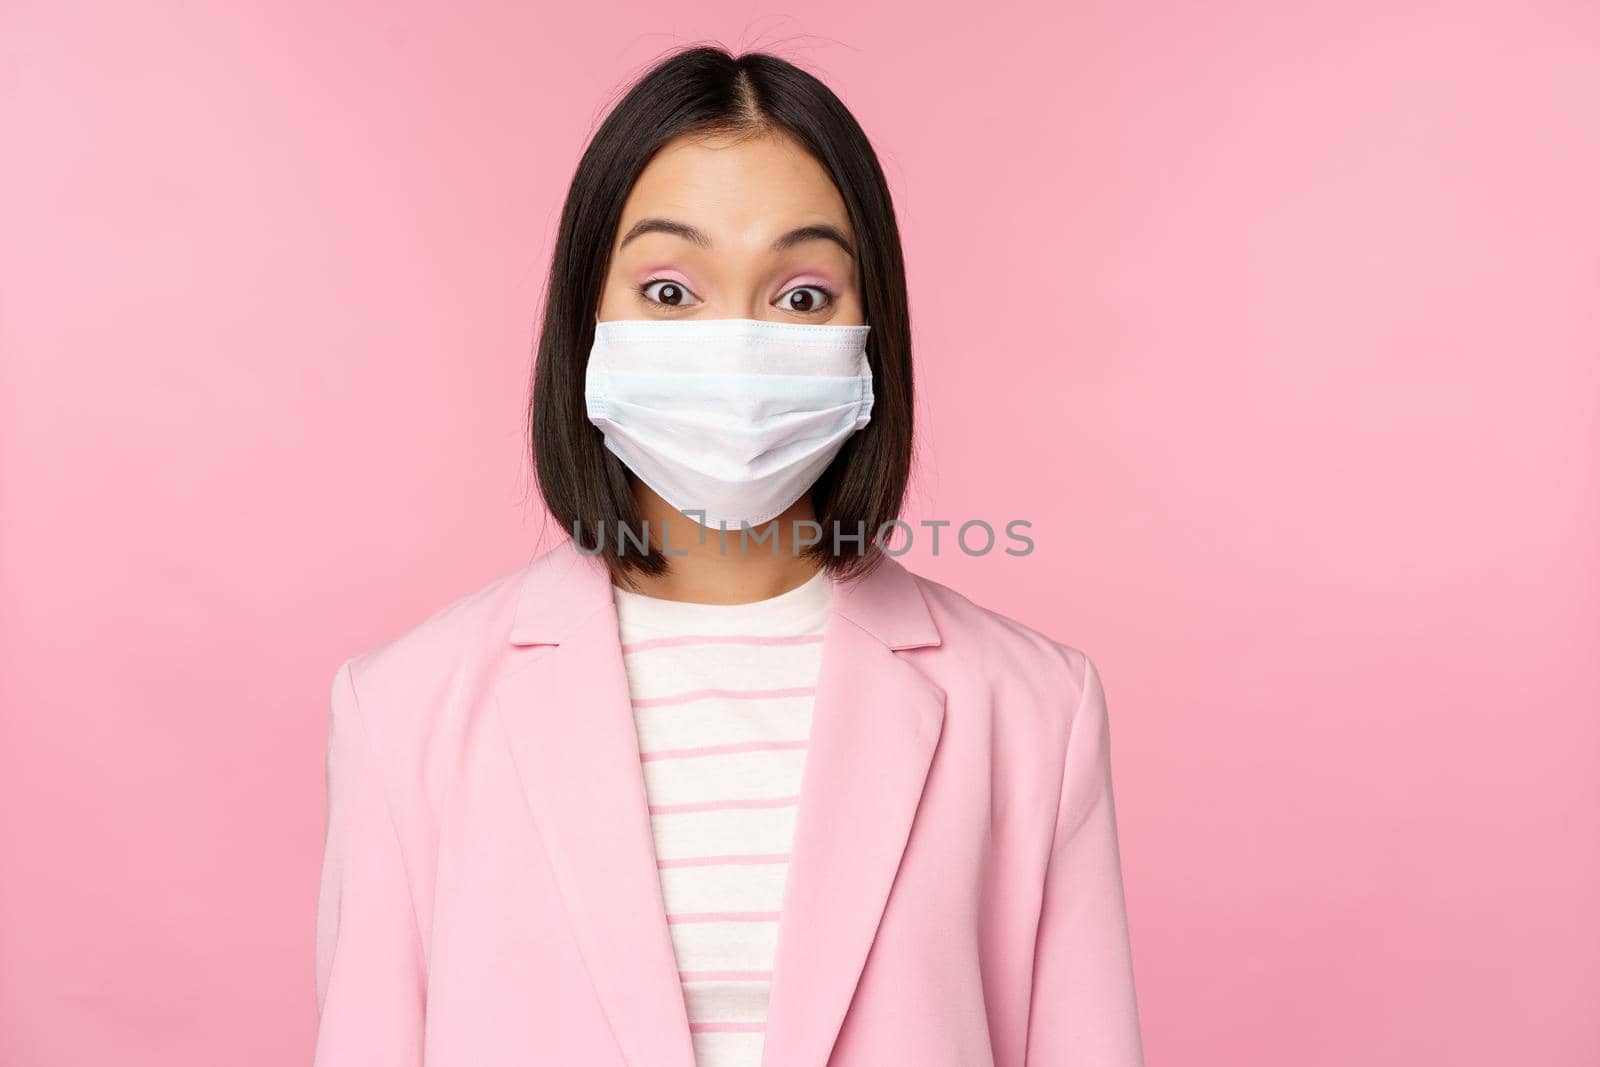 Portrait of asian businesswoman in medical face mask, wearing suit, concept of office work during covid-19 pandemic, standing over pink background.